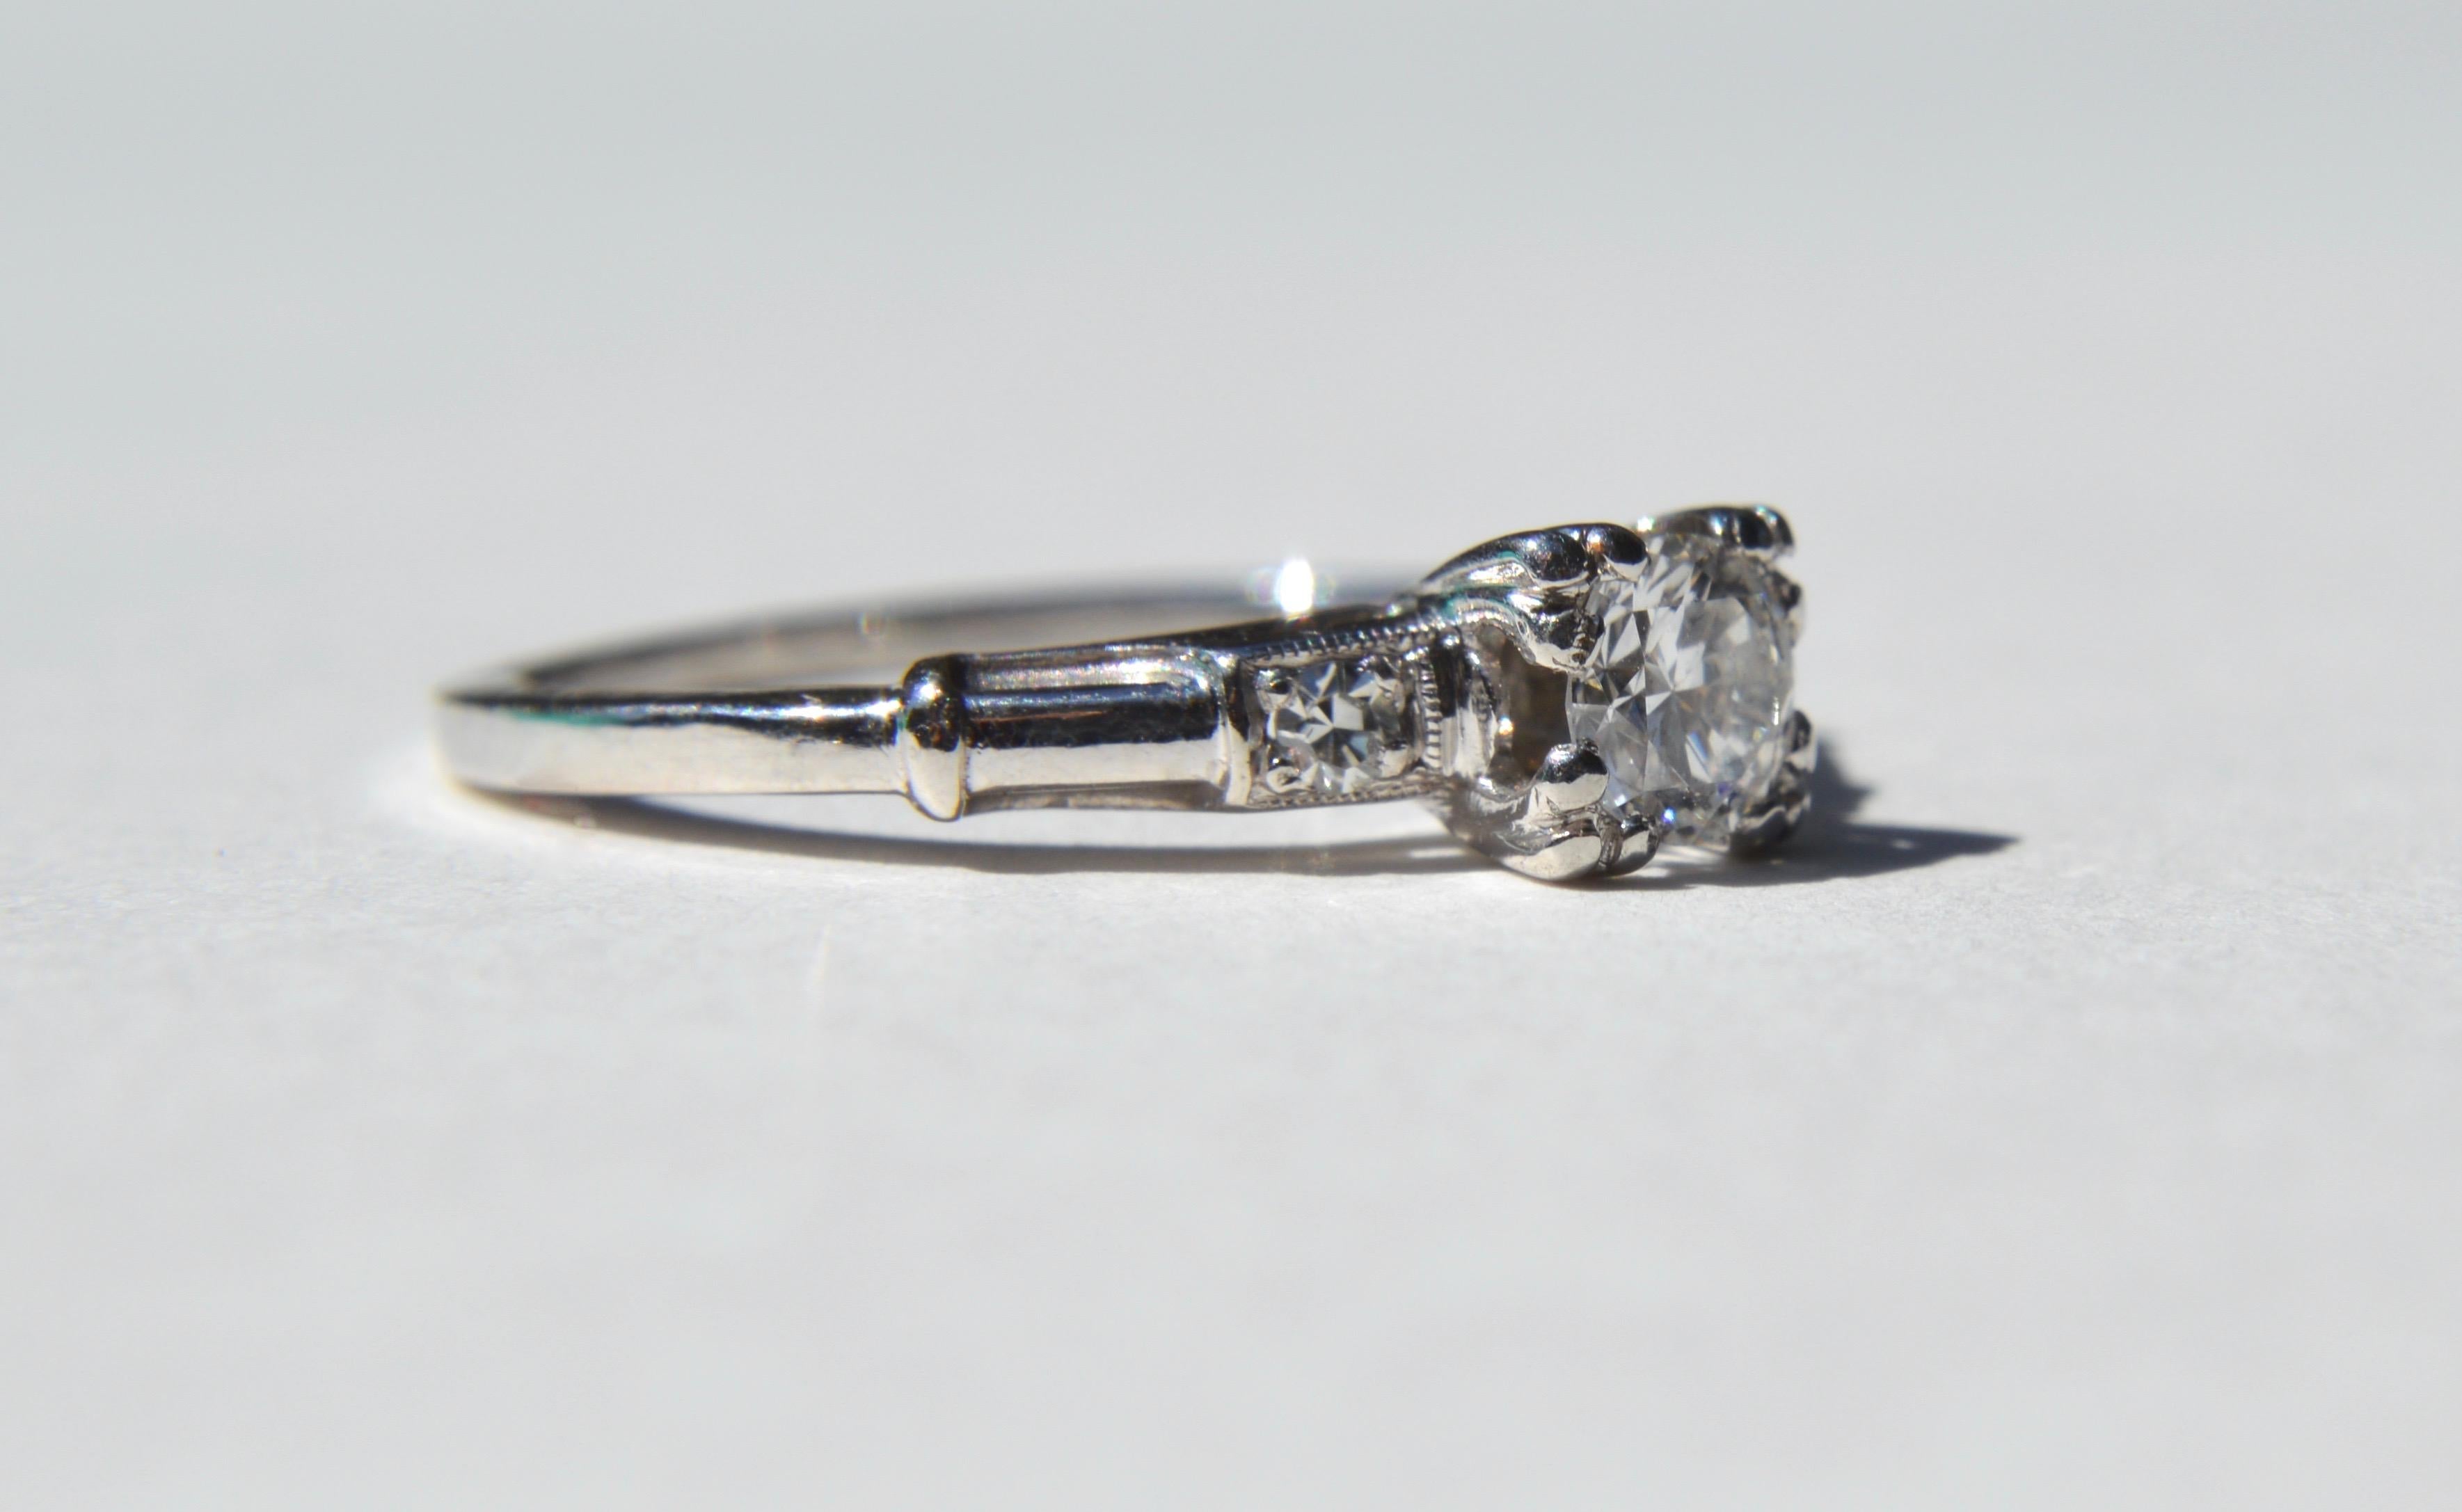 Gorgeous delicate antique Art Deco era circa 1940s platinum engagement ring with a sparkling .30 carat brilliant round cut diamond with 2 smaller diamonds. The diamonds have no inclusions seen under a loupe, and is very clear and white, have been